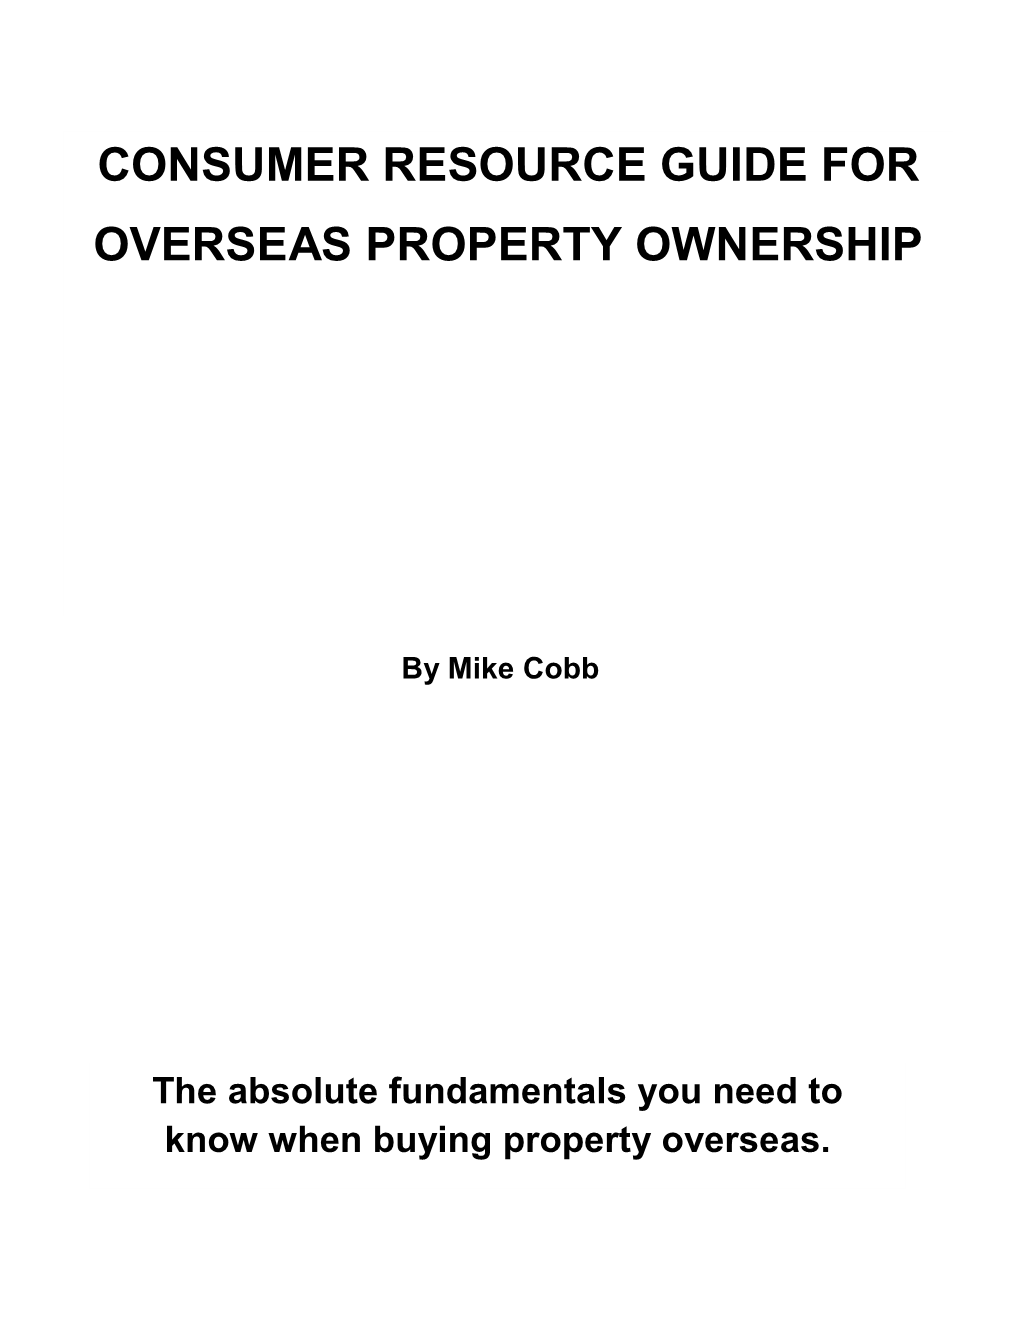 Consumer Resource Guide for Overseas Property Ownership